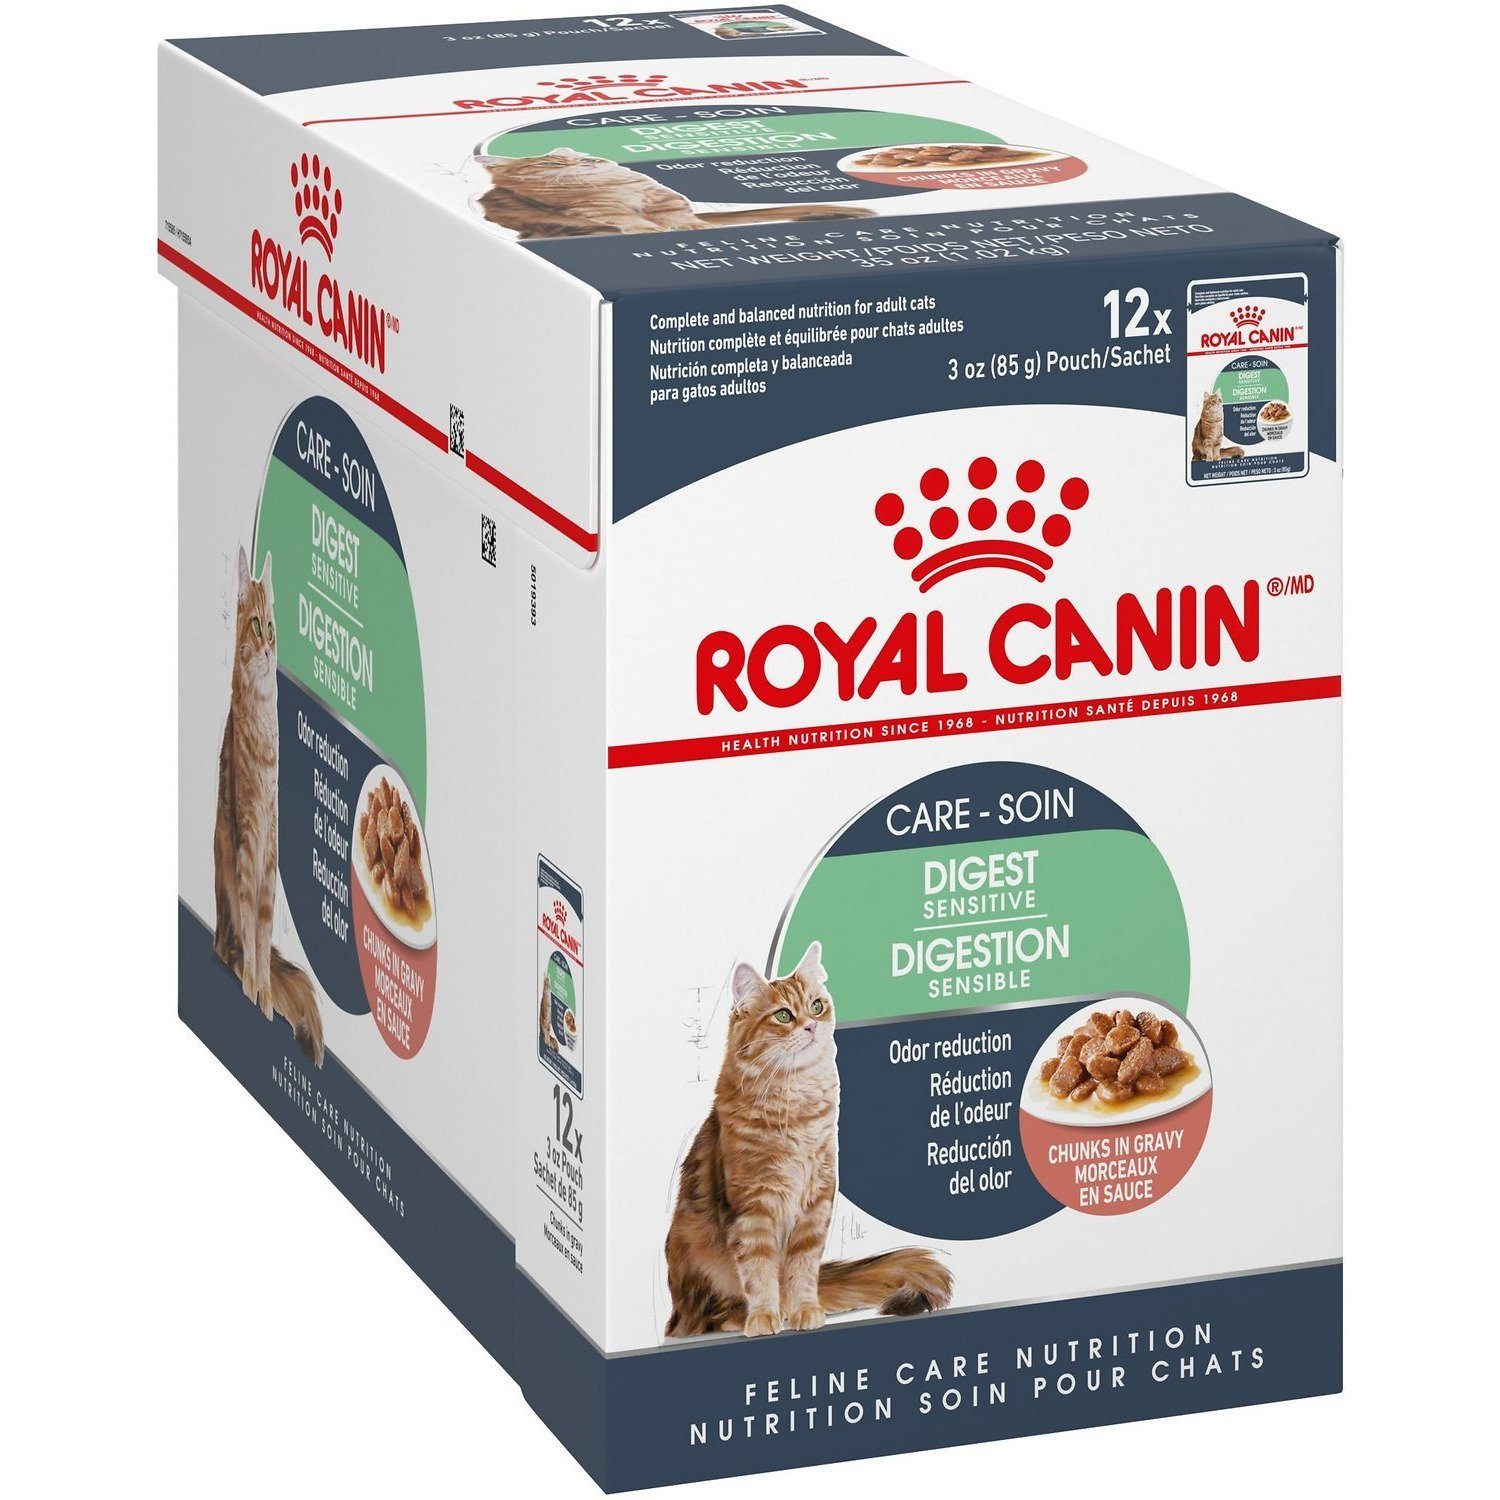 Snooze Gevangene langzaam Royal Canin Cat Pouches Chunks In Gravy Adult Digest Sensitive – PetMax